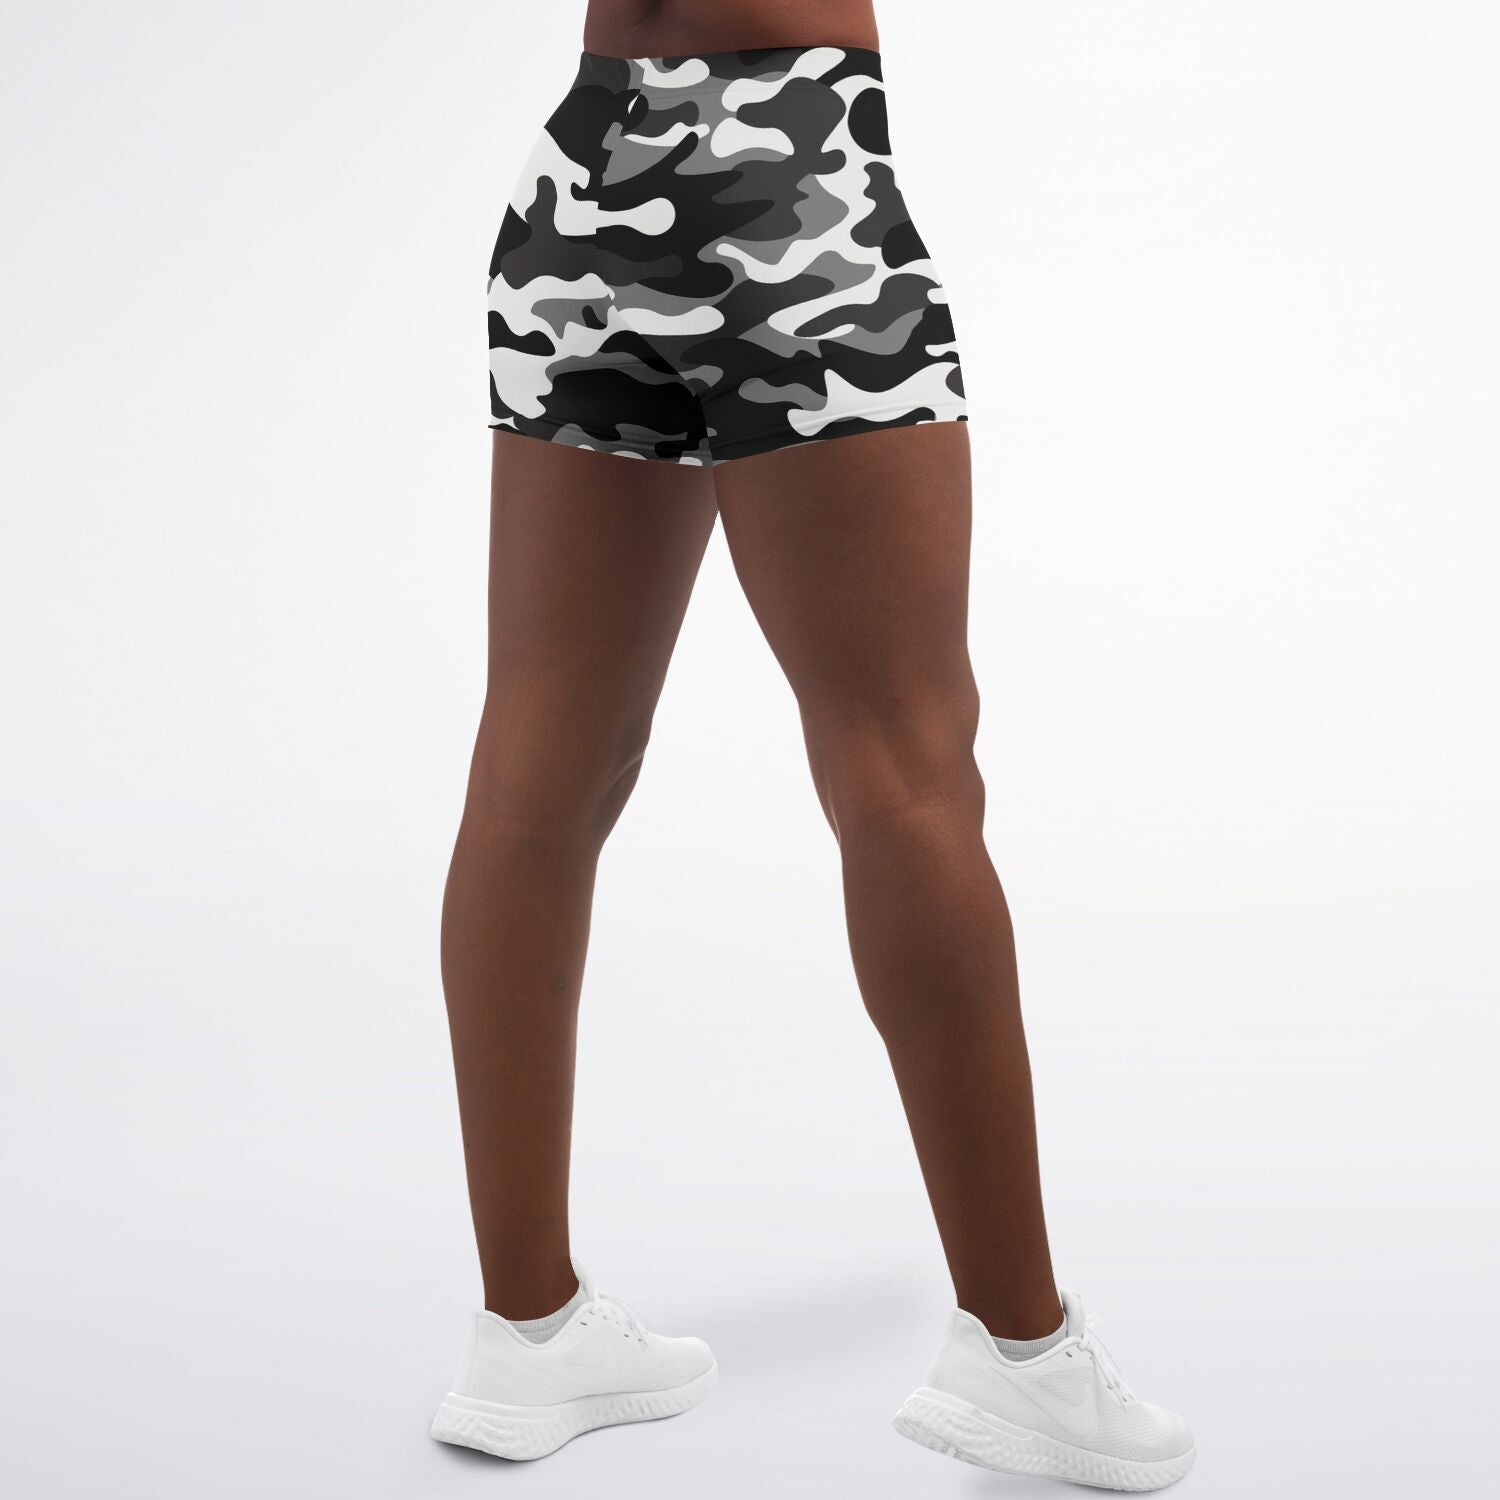 Women's Urban Jungle Black White Camouflage Mid-rise Athletic Booty Shorts